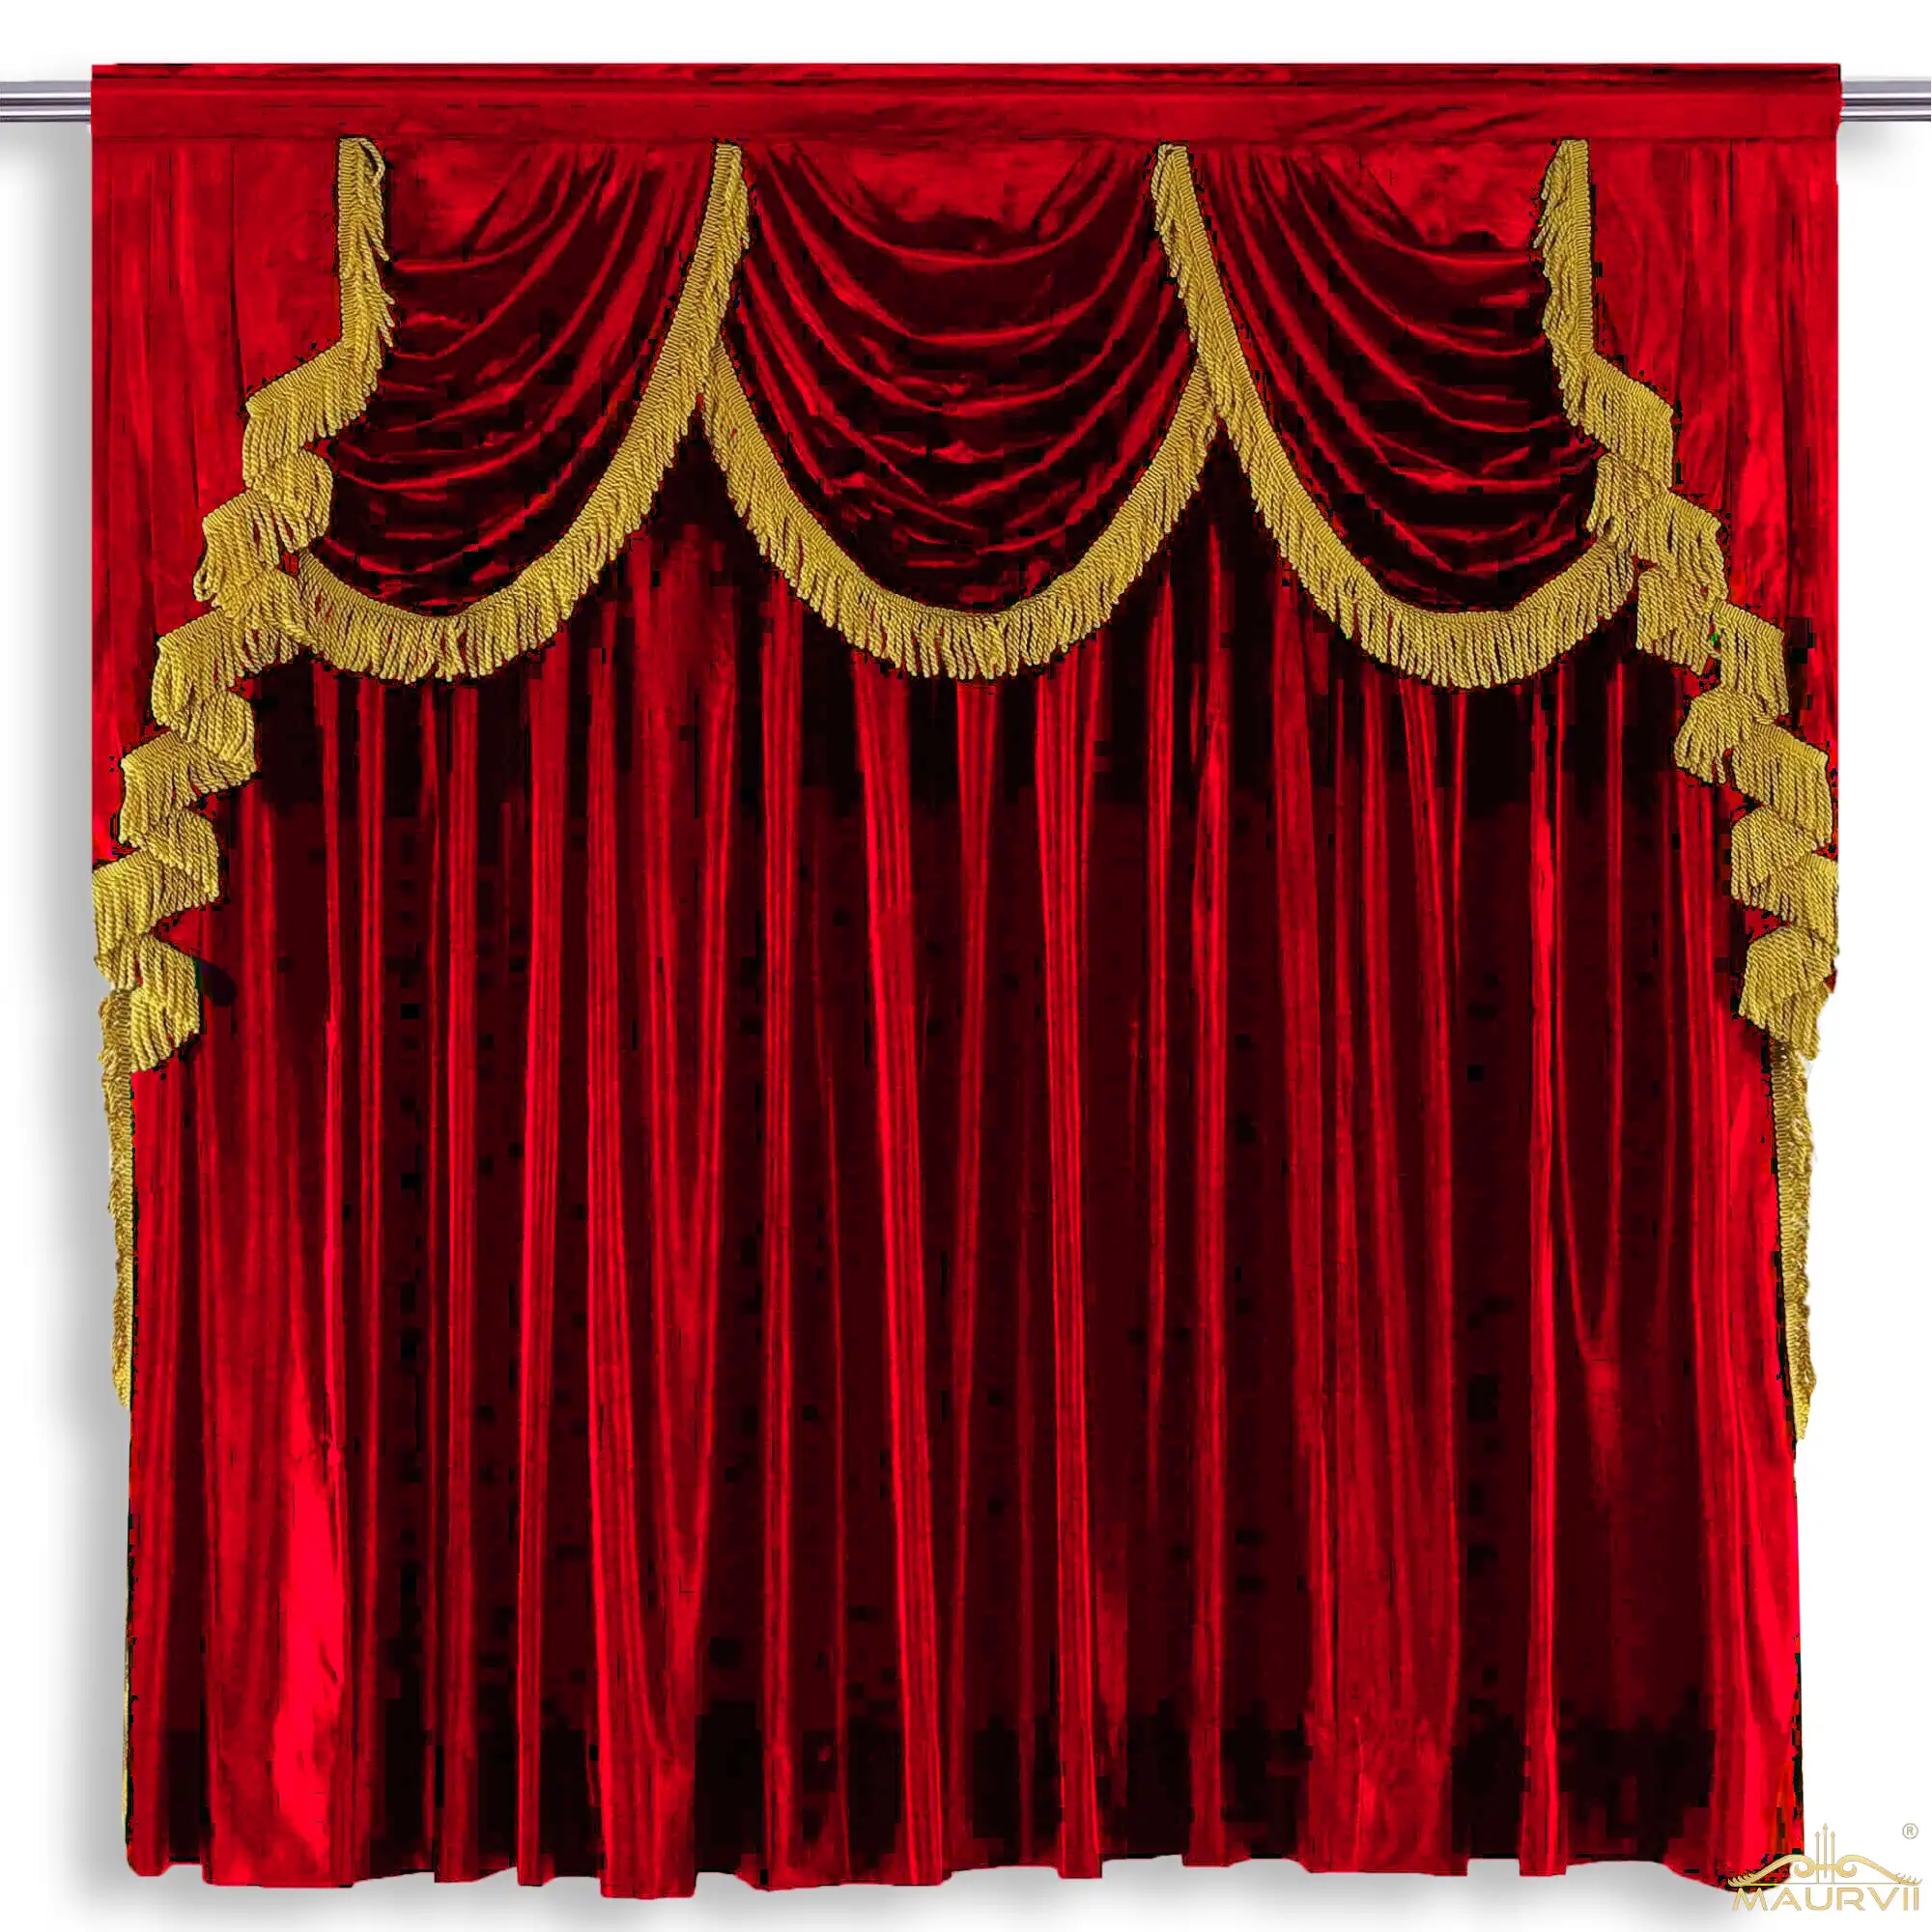 Decorative stage curtains in red color